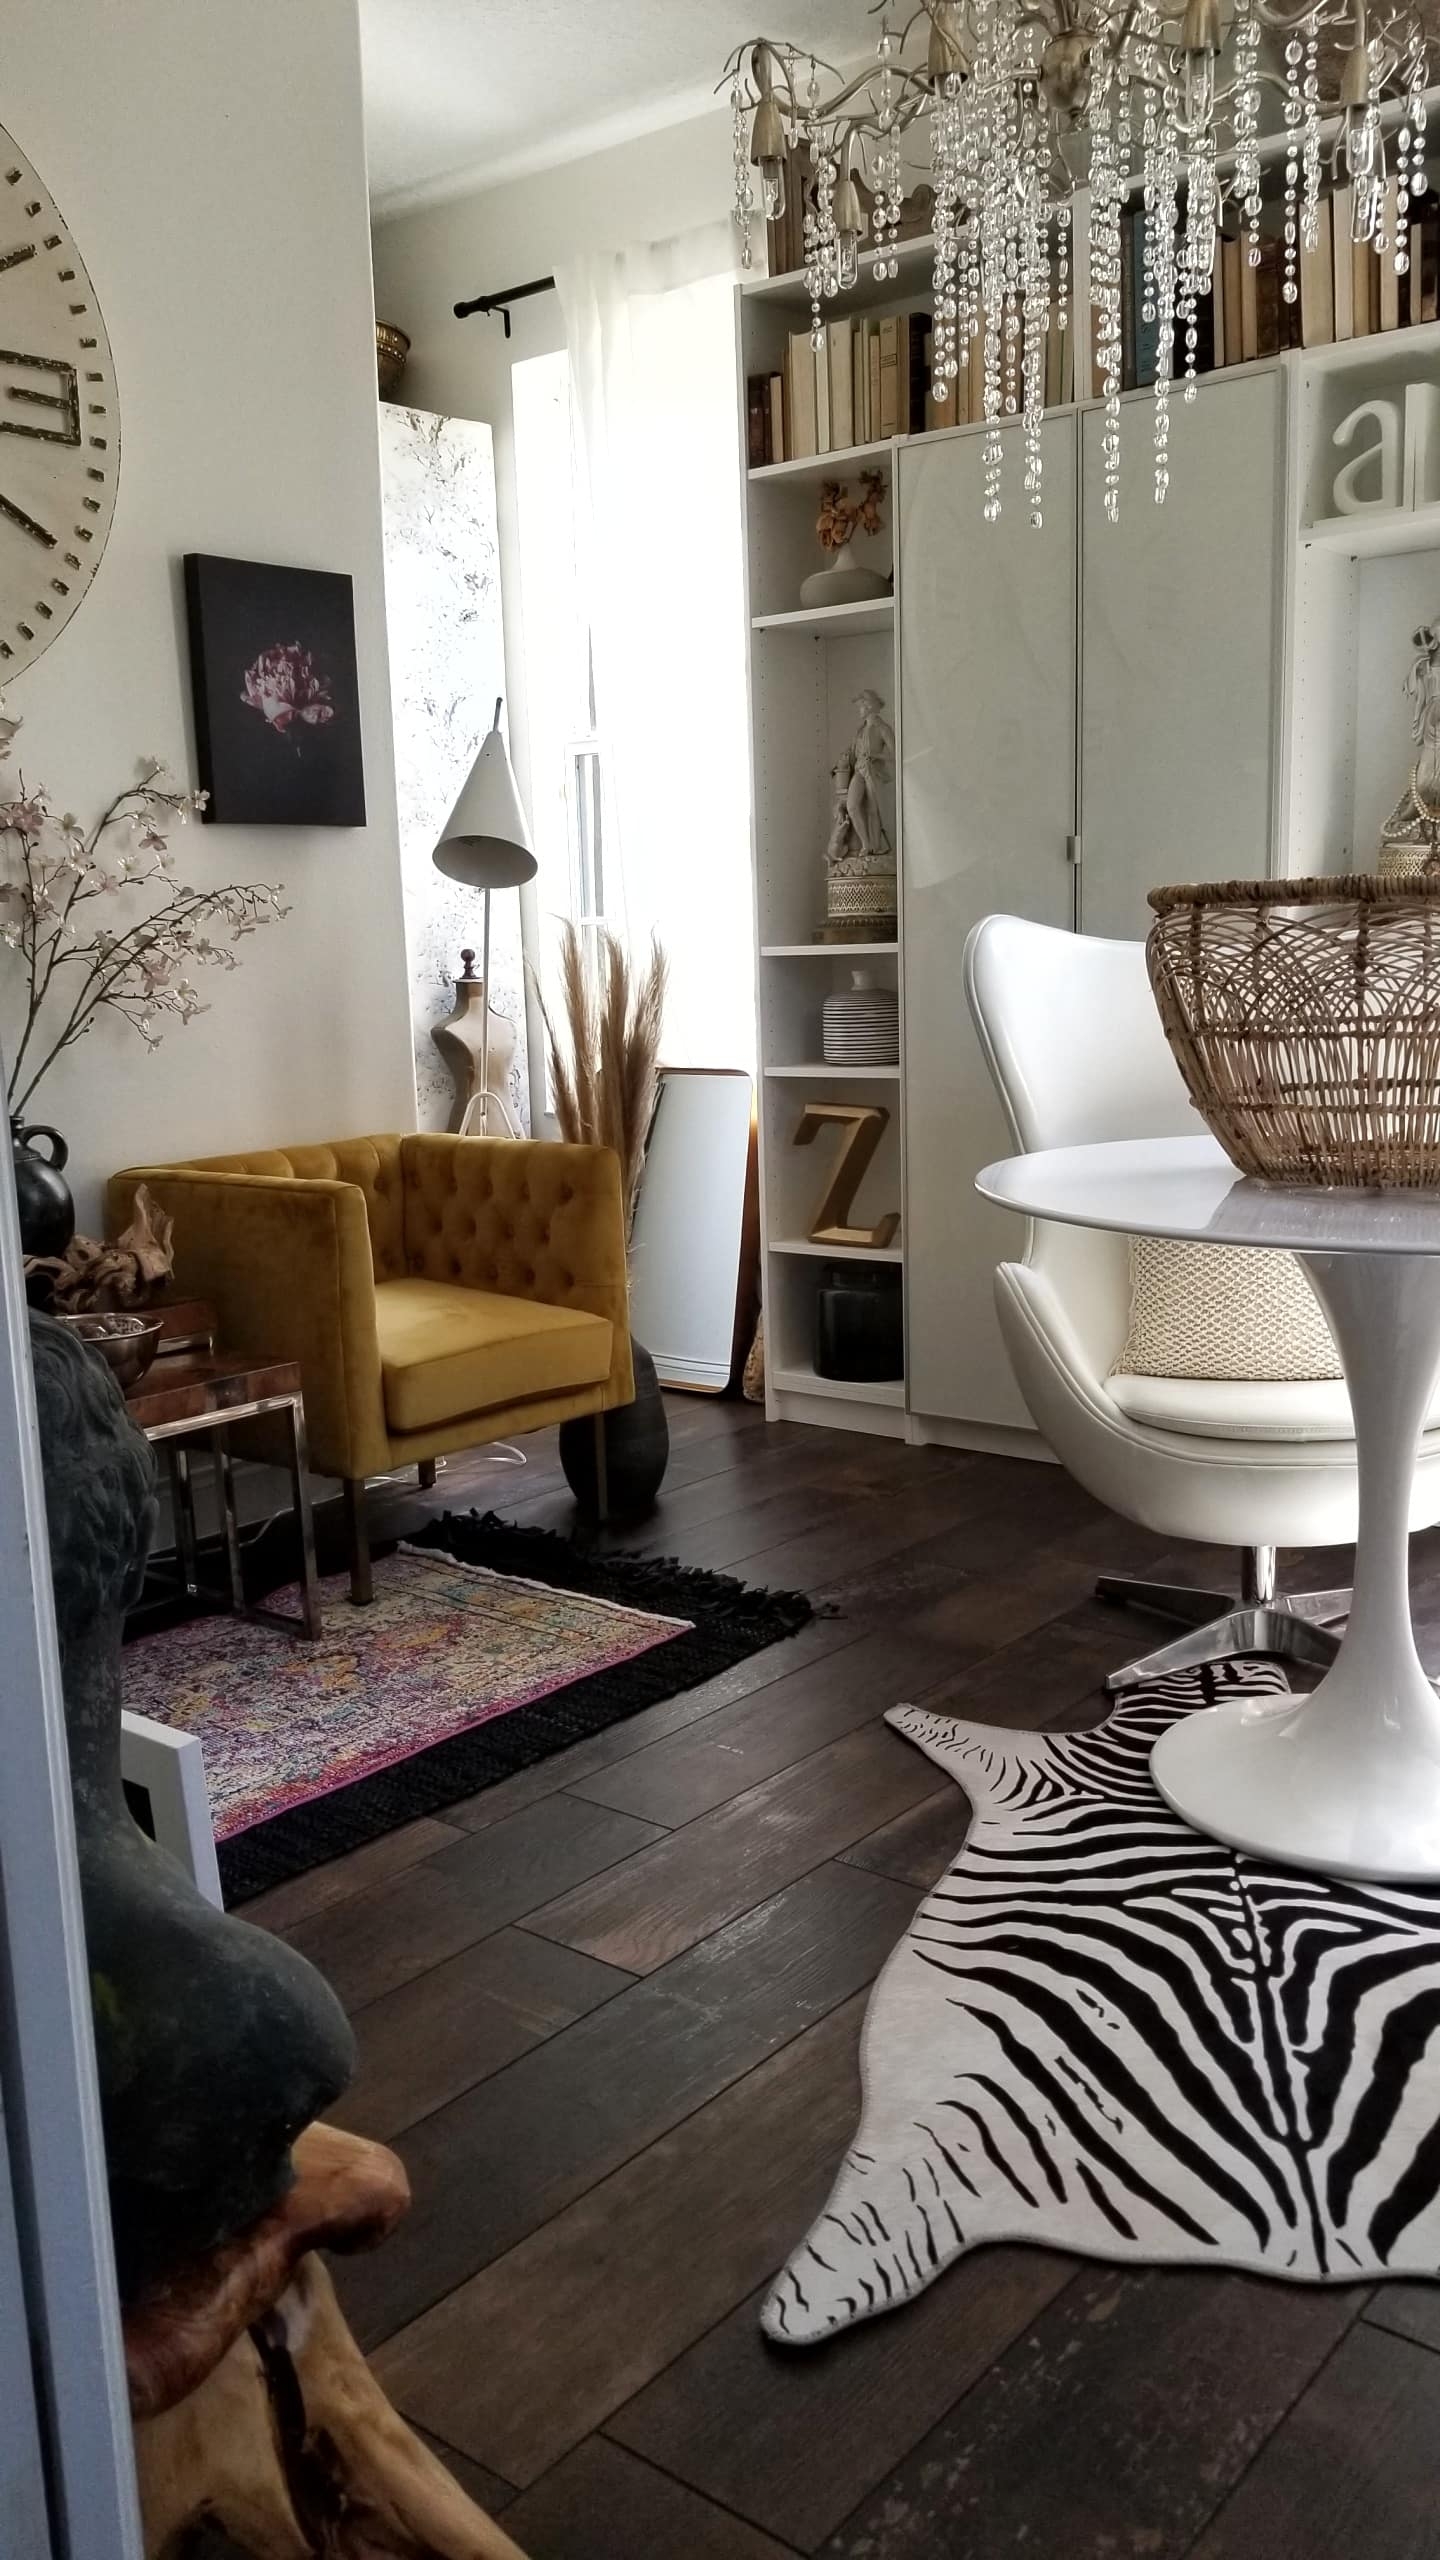 Mid Century Modern Urban Industrial Chic She Den Office She Shed Lound Velvet Chairs White Tulip Table Egg Chairs Black and White Decor Modern Glam Interior Decorating Ideas Wood Tile Floor Art New York Loft Mirror Wall art